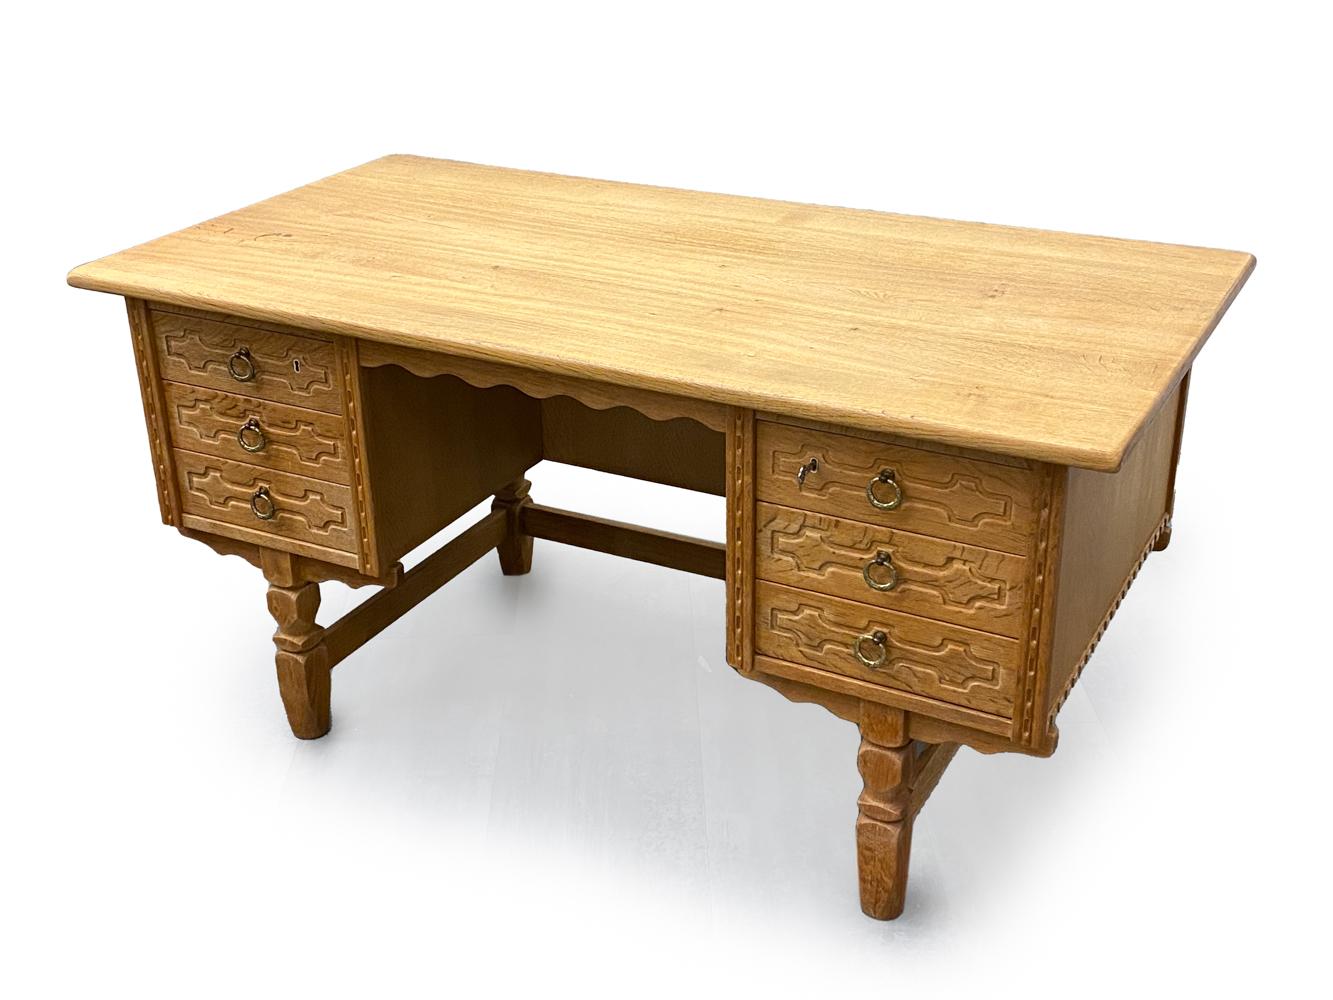 Step into a world where functionality meets artistry with the Henning Kjaernulf Danish Mid-Century Carved Oak Desk. Crafted during a time when every piece was a labor of love and a reflection of impeccable taste, this desk stands as a paragon of